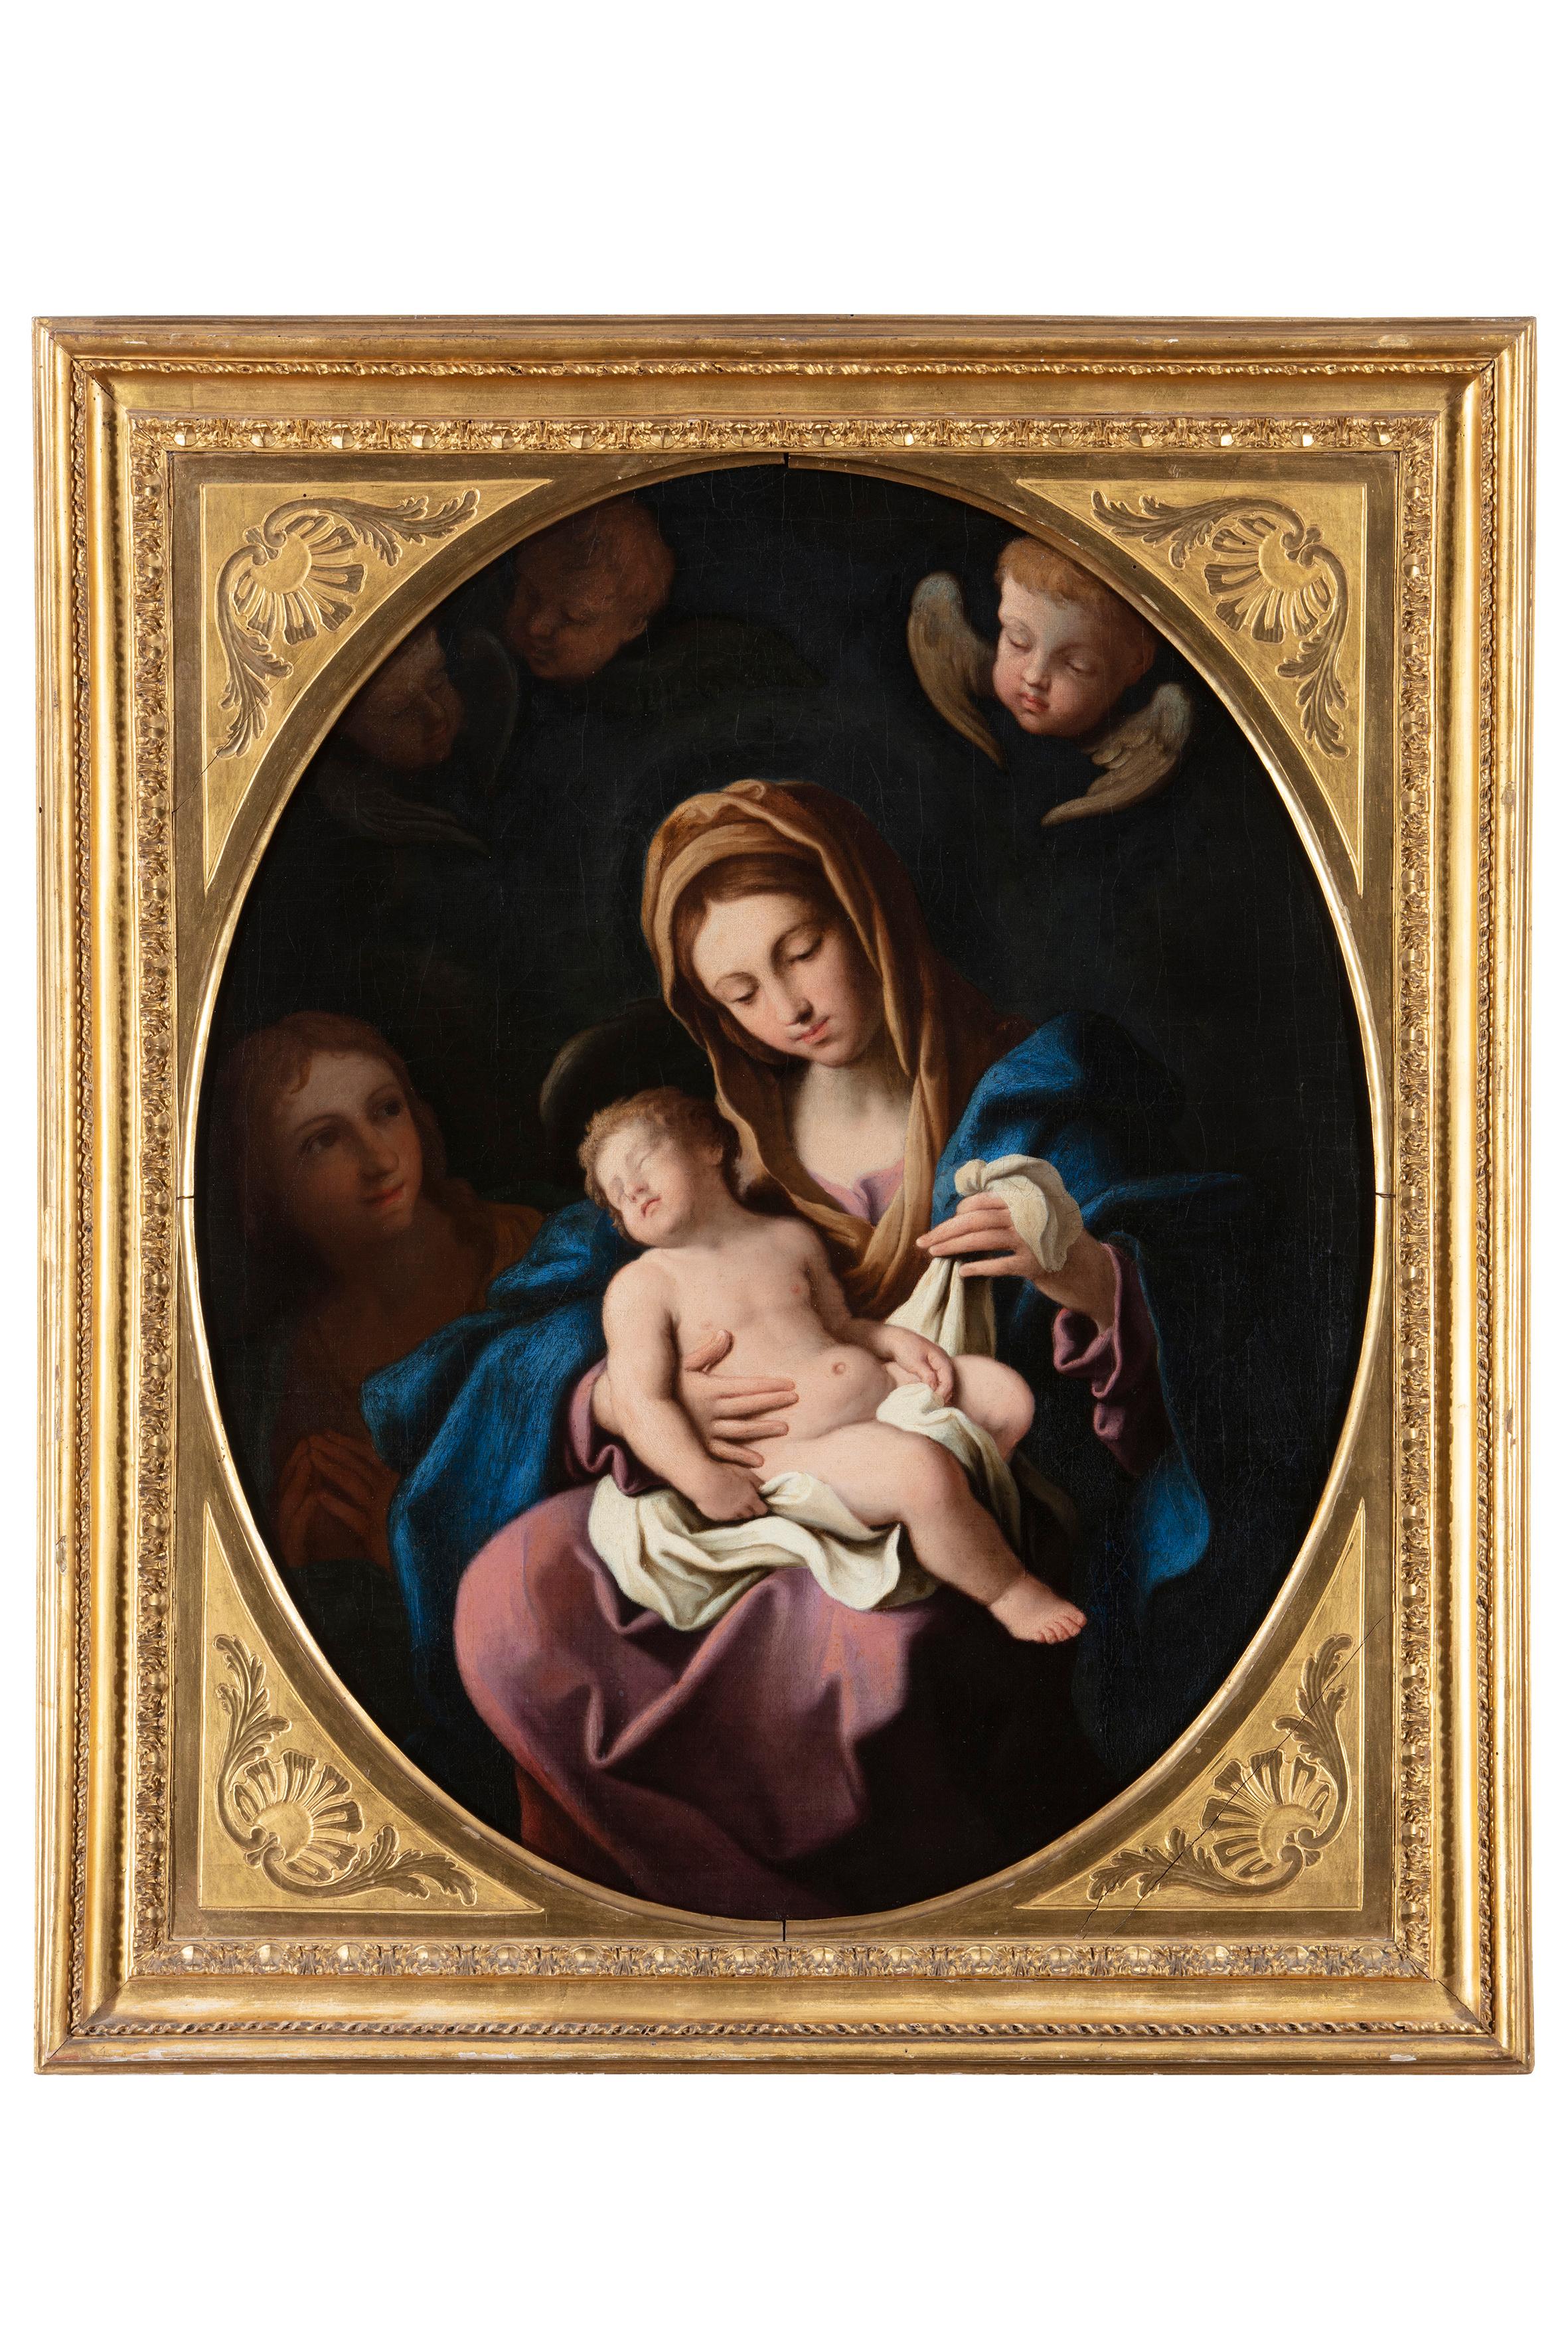 Gian Domenico Cerrini Figurative Painting - 17th Century By Cerrini Virgin with the Child and angels Oil on Canvas